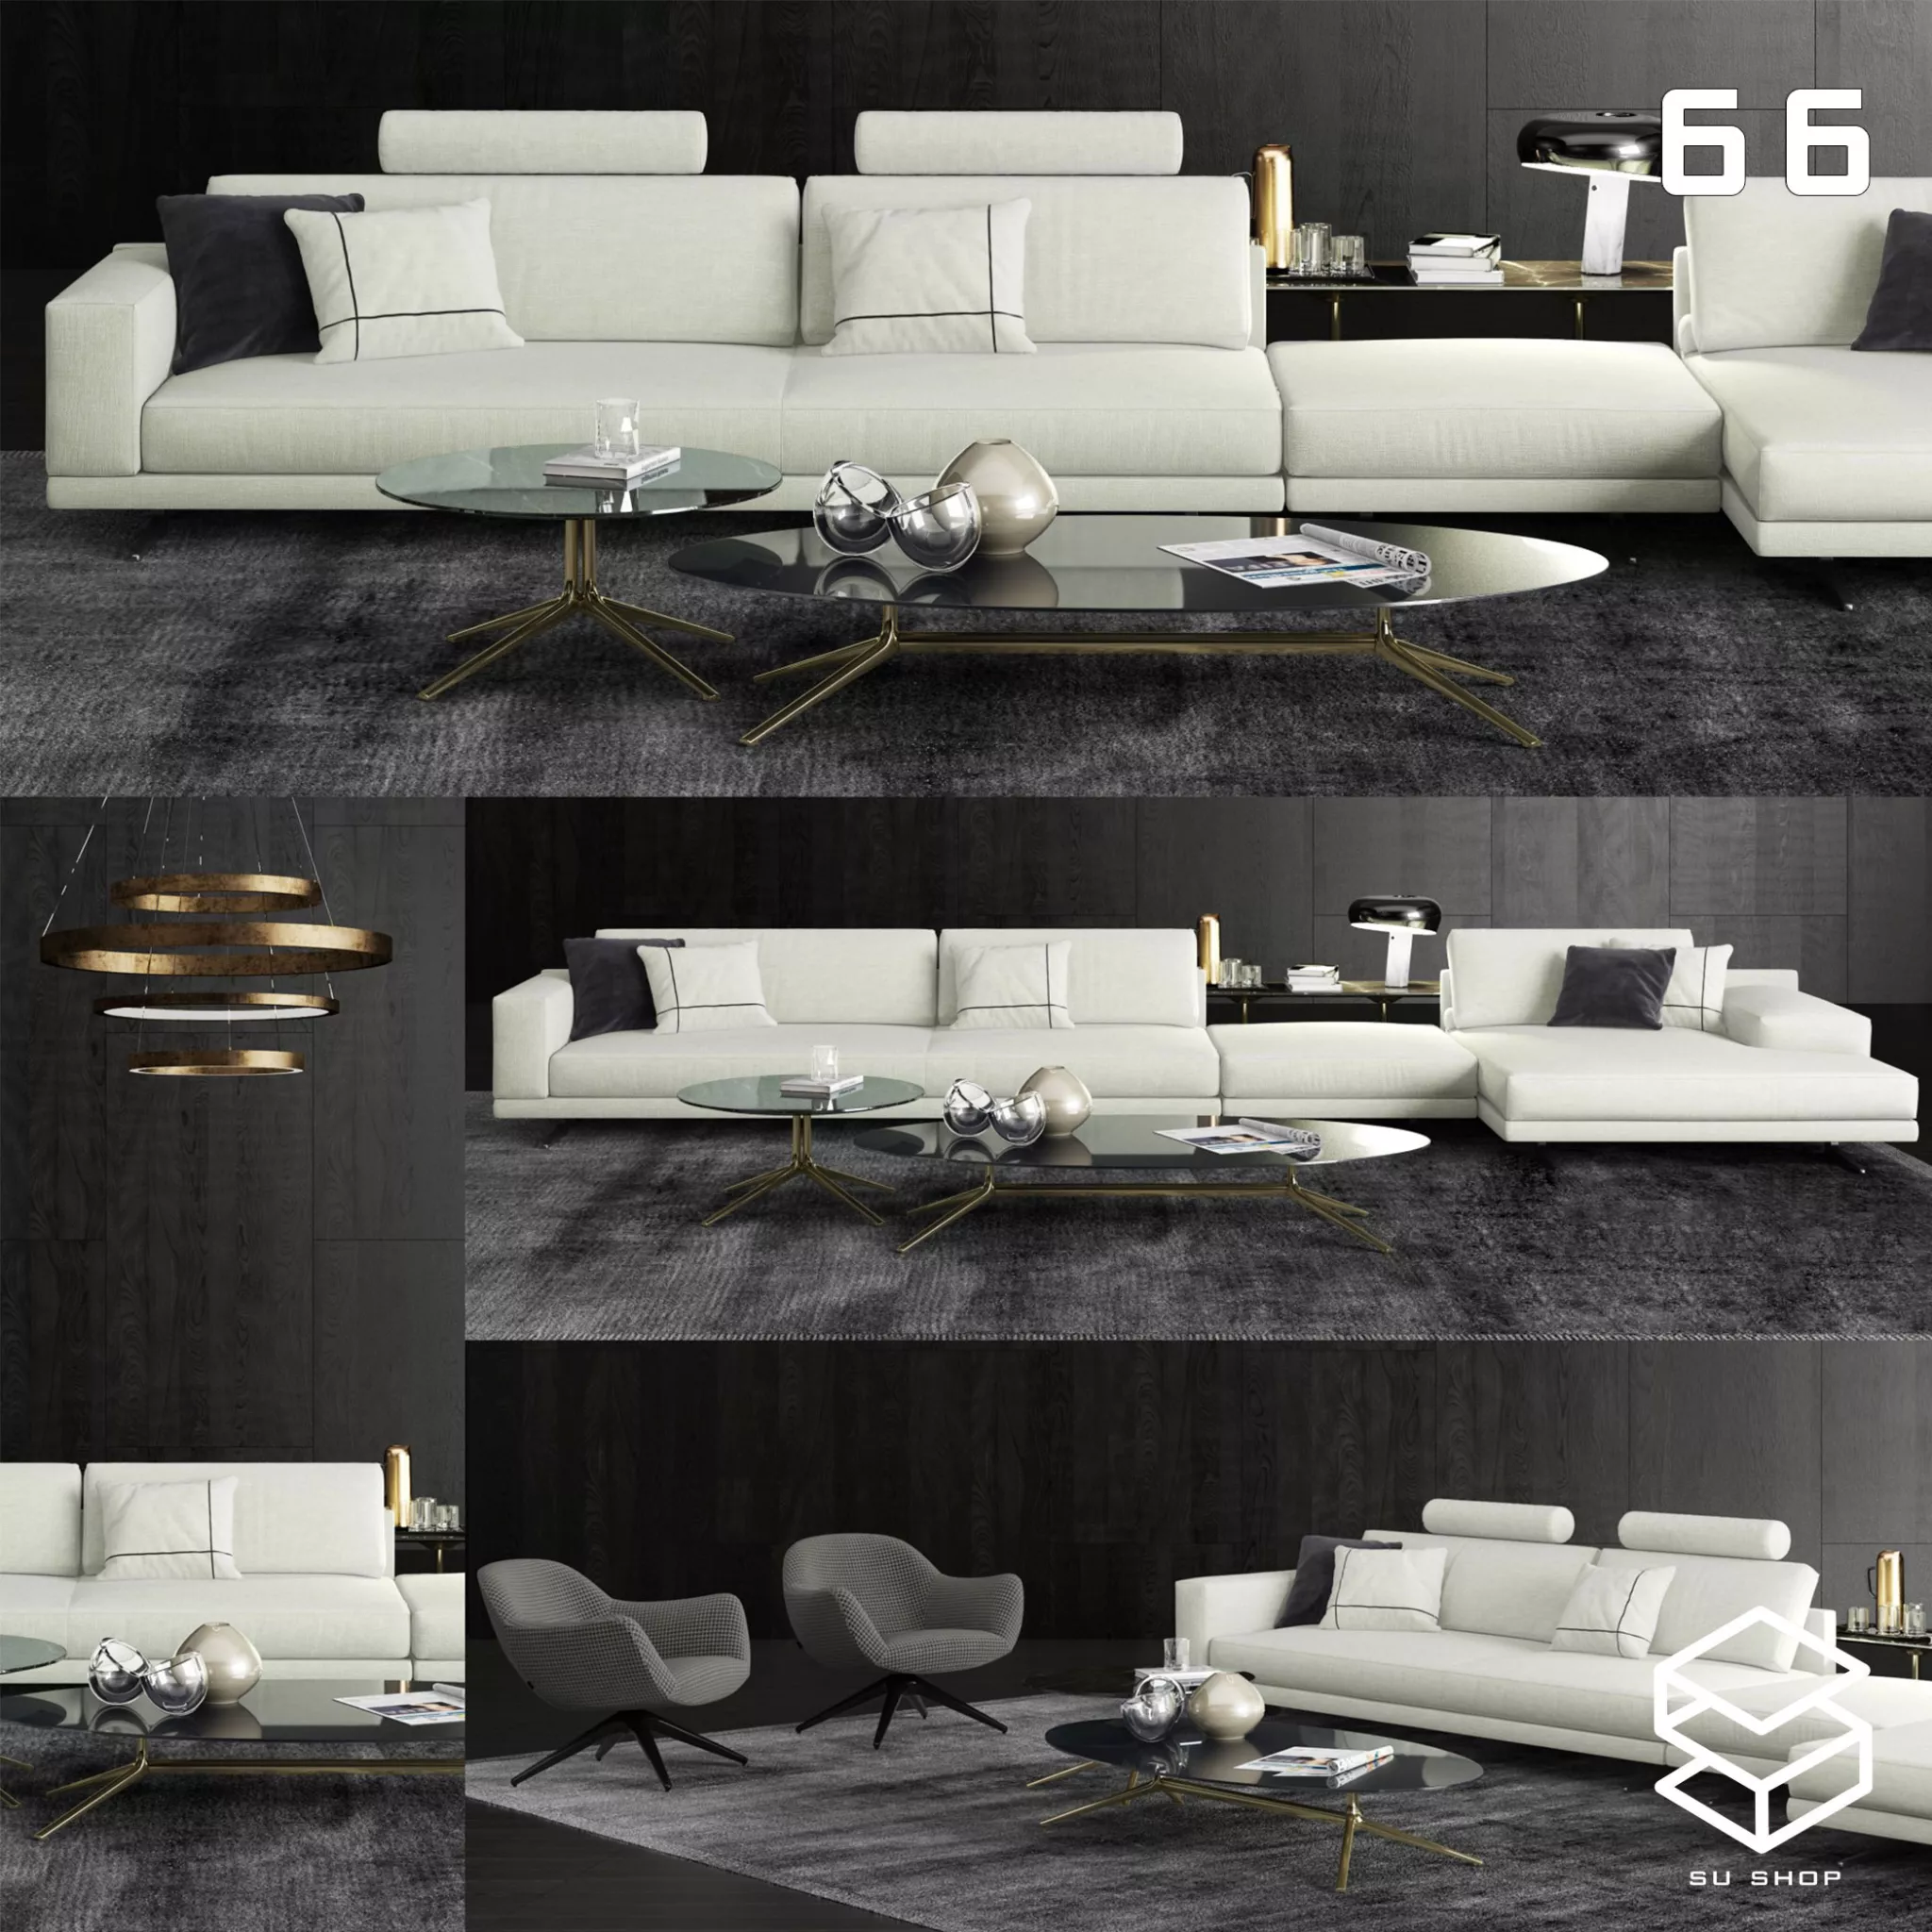 MODERN SOFA - SKETCHUP 3D MODEL - VRAY OR ENSCAPE - ID13692